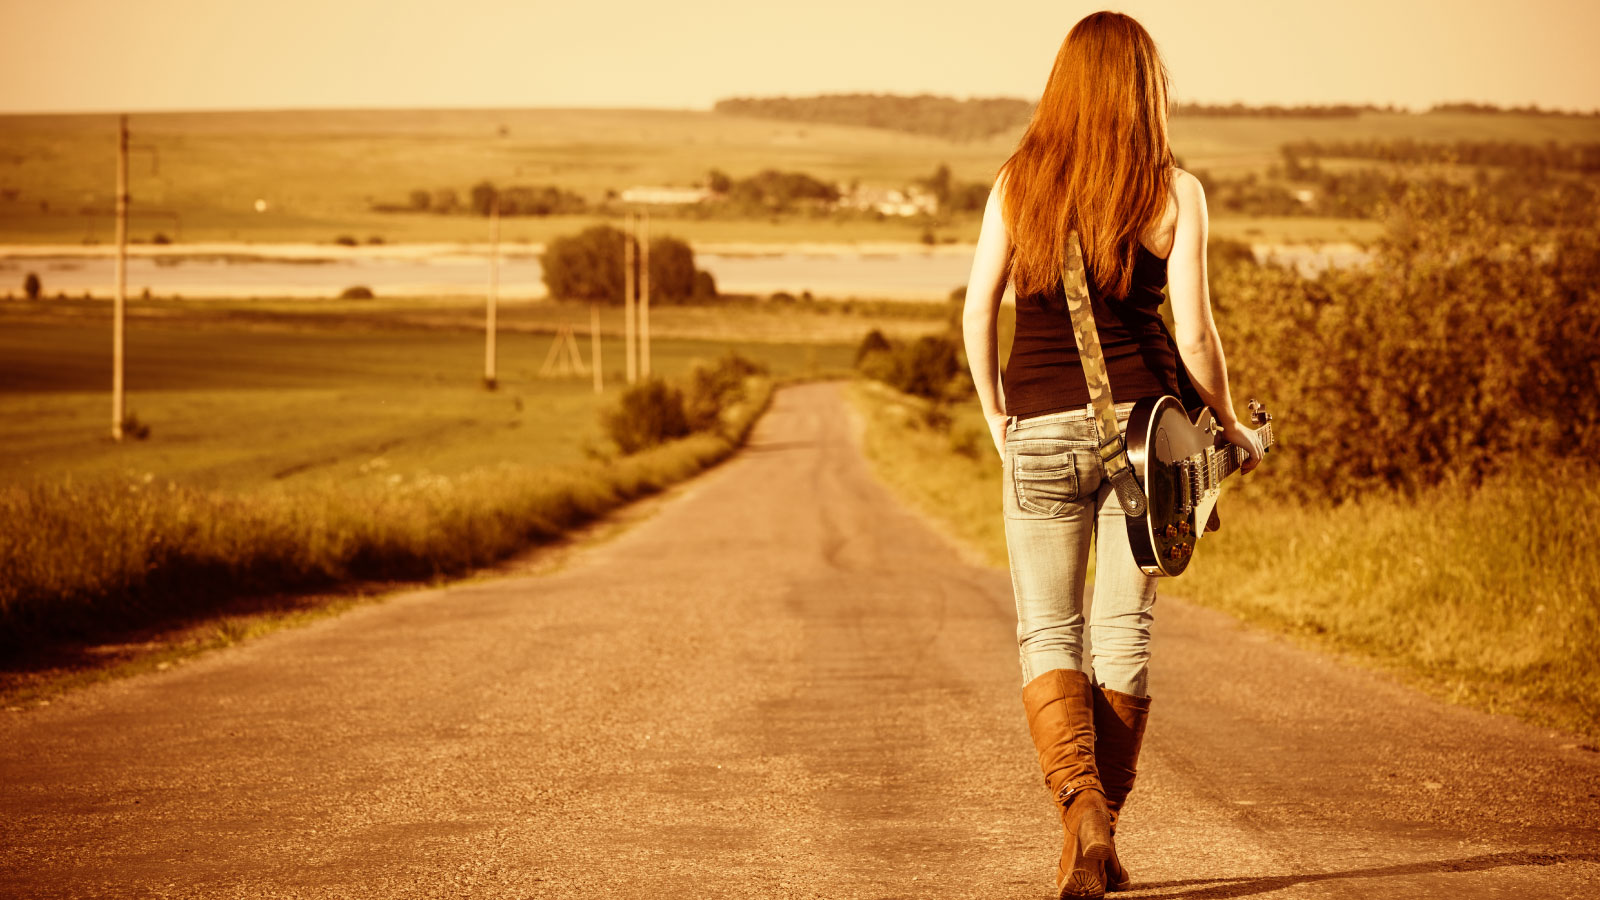 Woman With Guitar On The Country Road - Girl Walking With Guitar - HD Wallpaper 